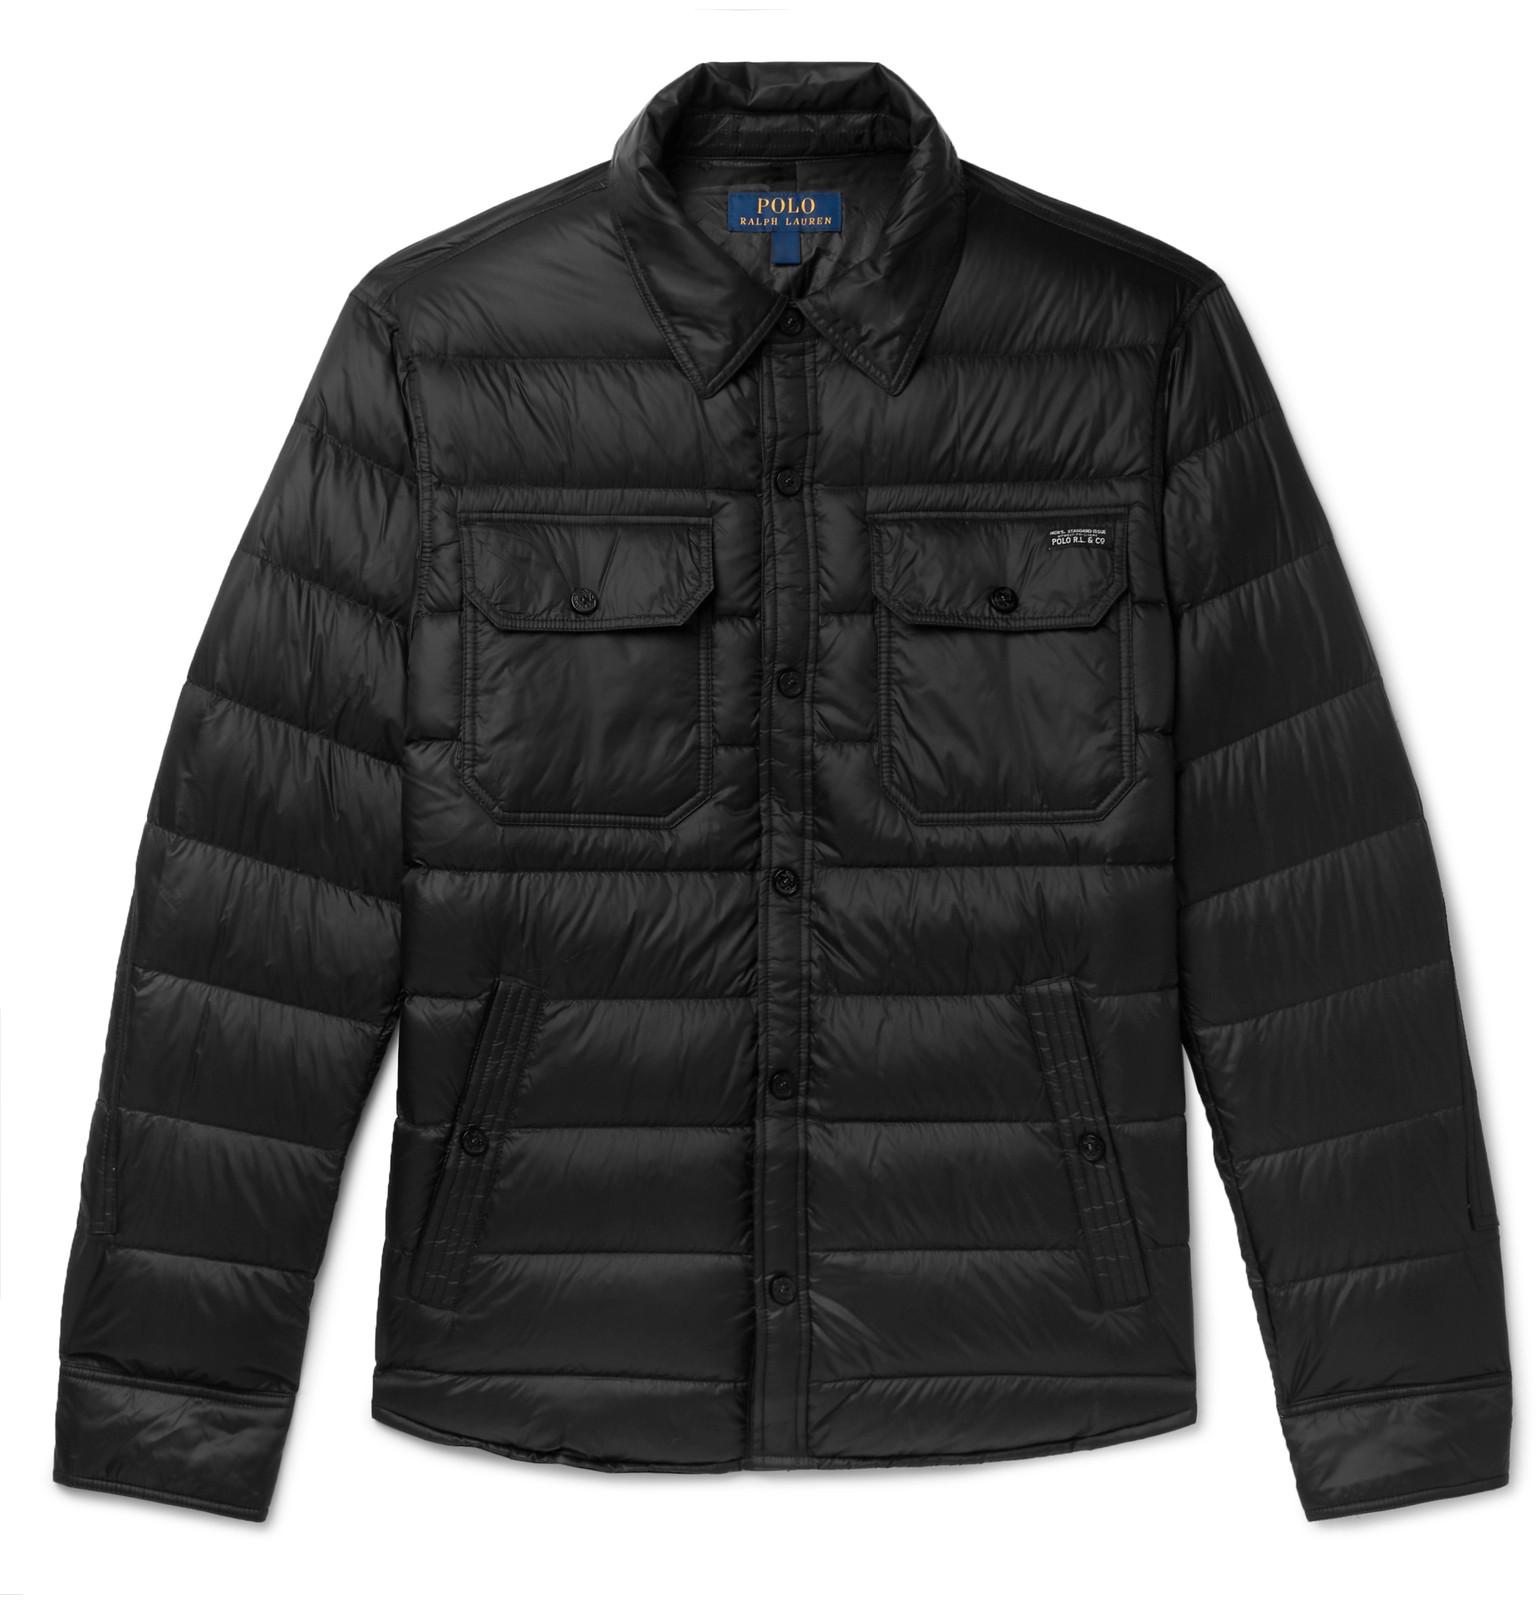 Polo Ralph Lauren Synthetic Quilted Shirt Jacket in Black for Men - Lyst